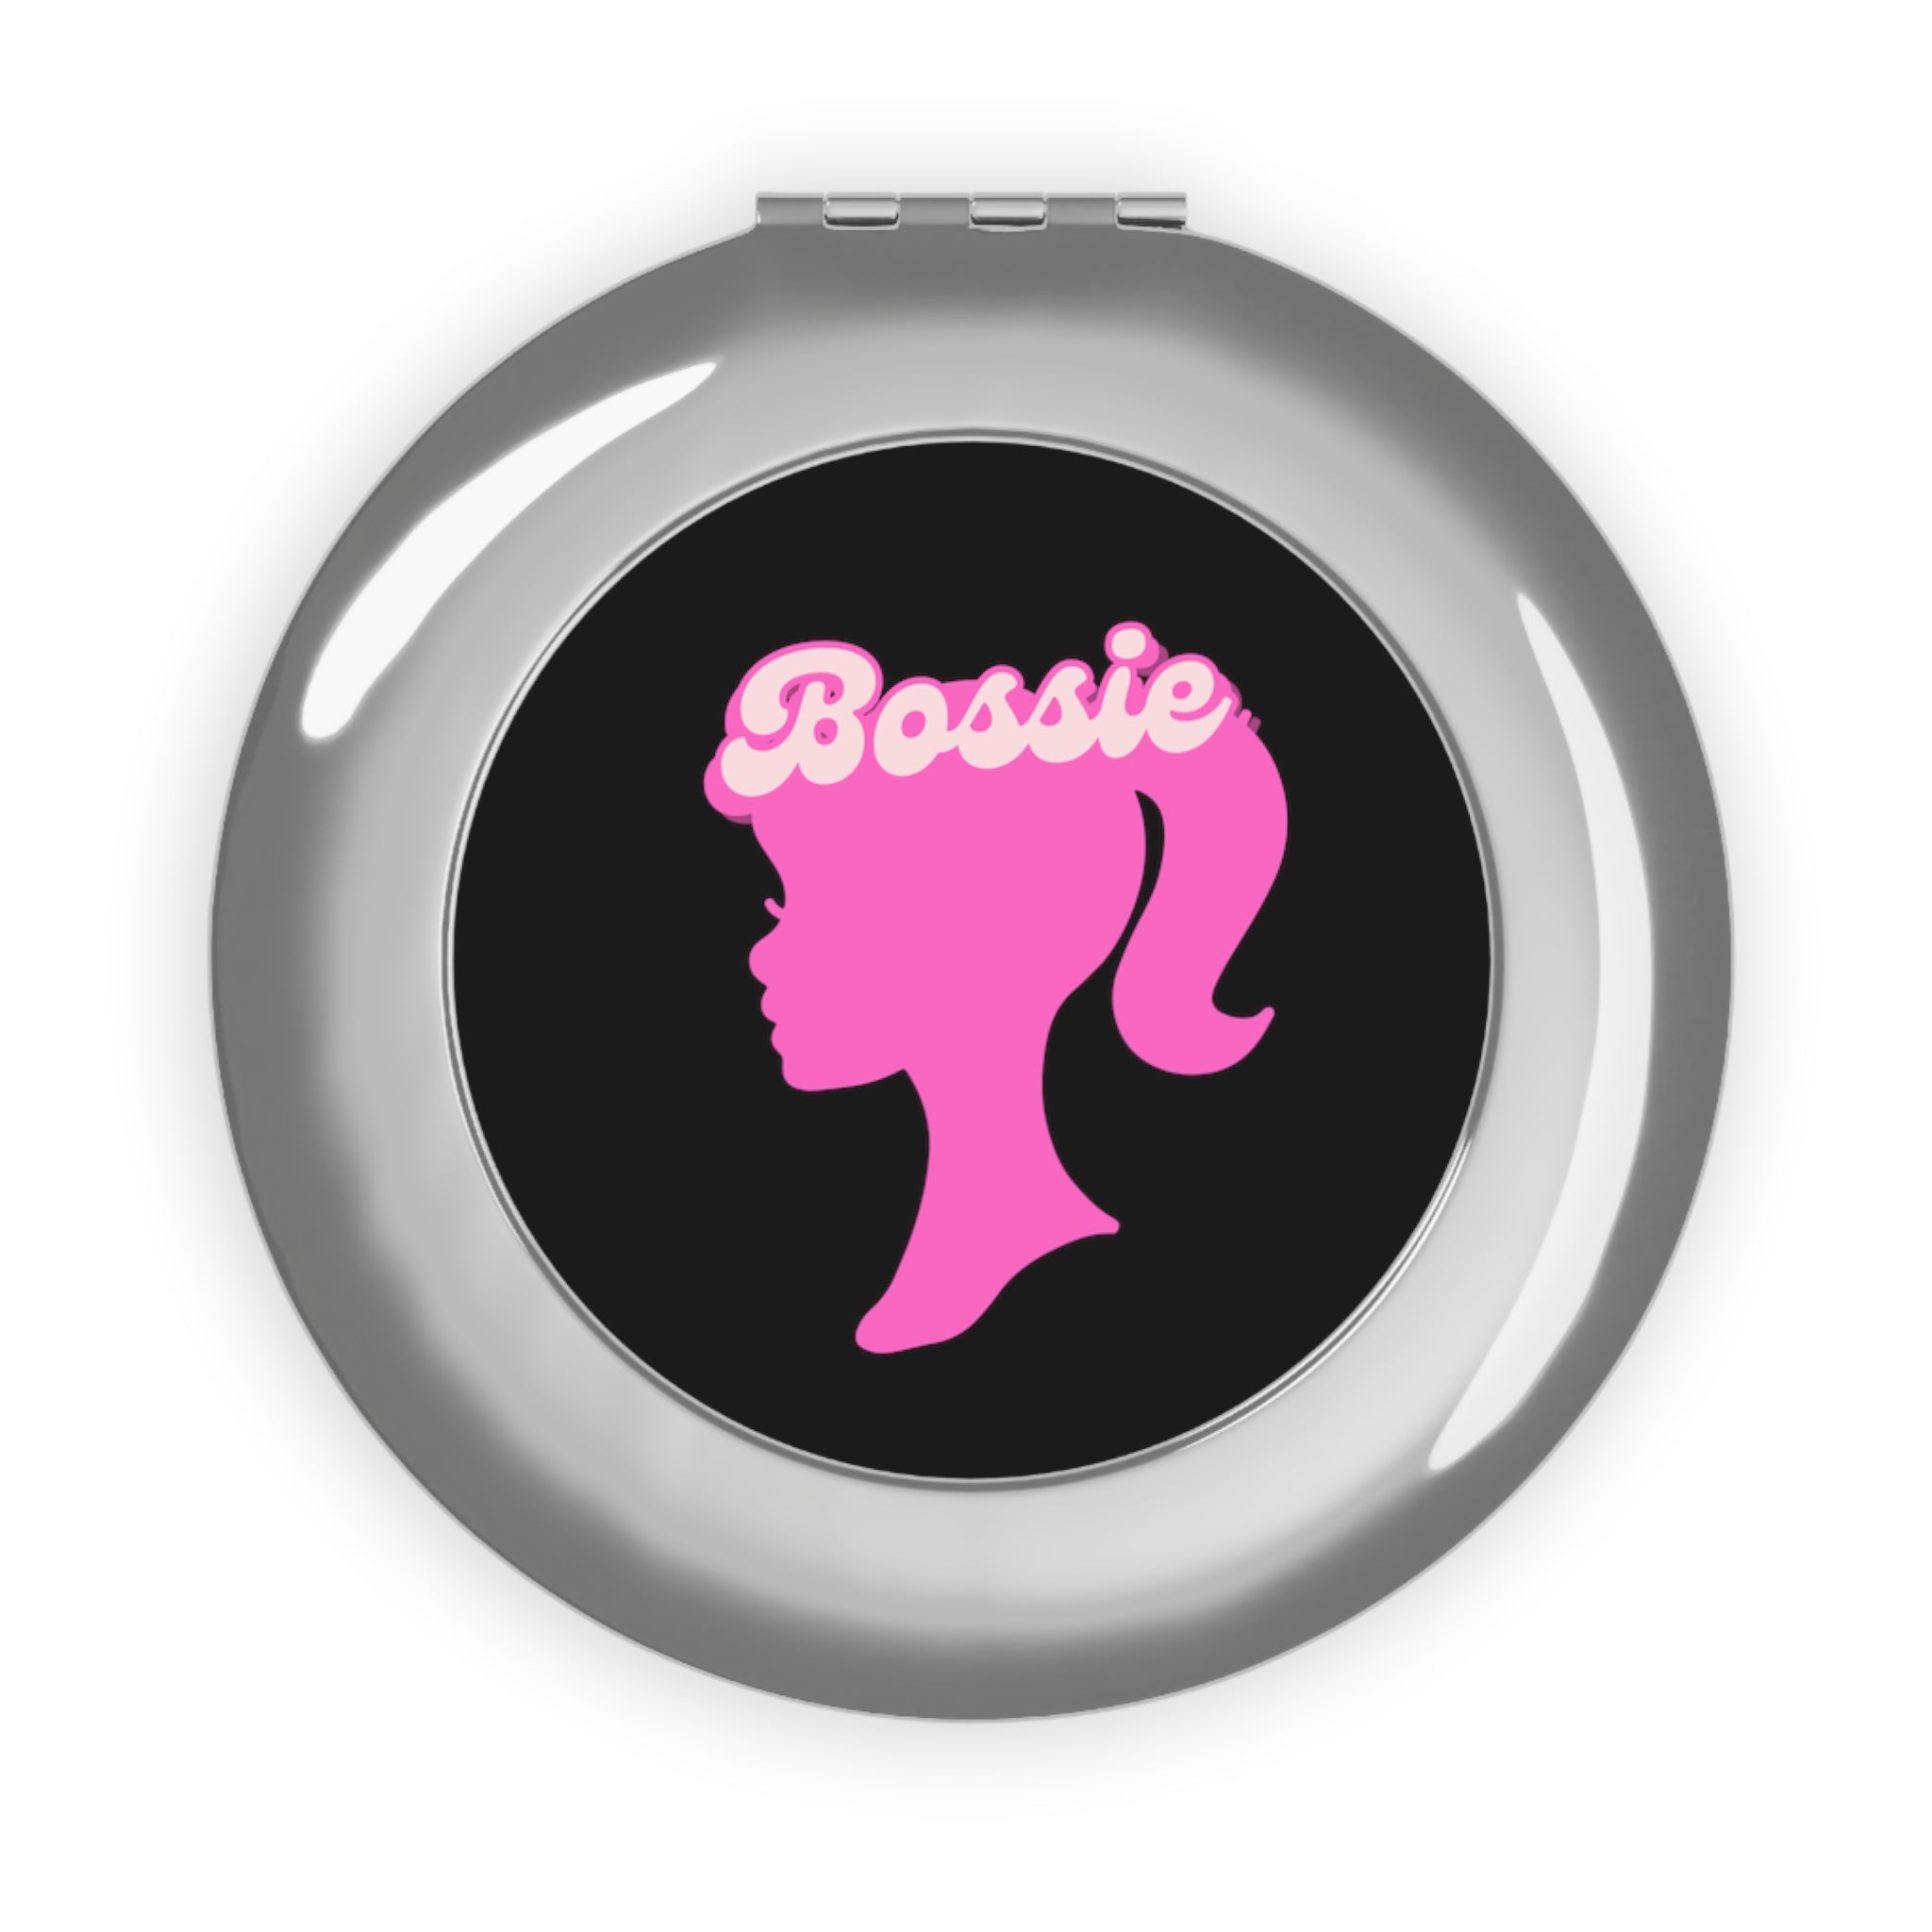 Barbie-Themed Bossie (Silhouette) Compact Travel Mirror Accessories Silver-Glossy-One-size The Middle Aged Groove